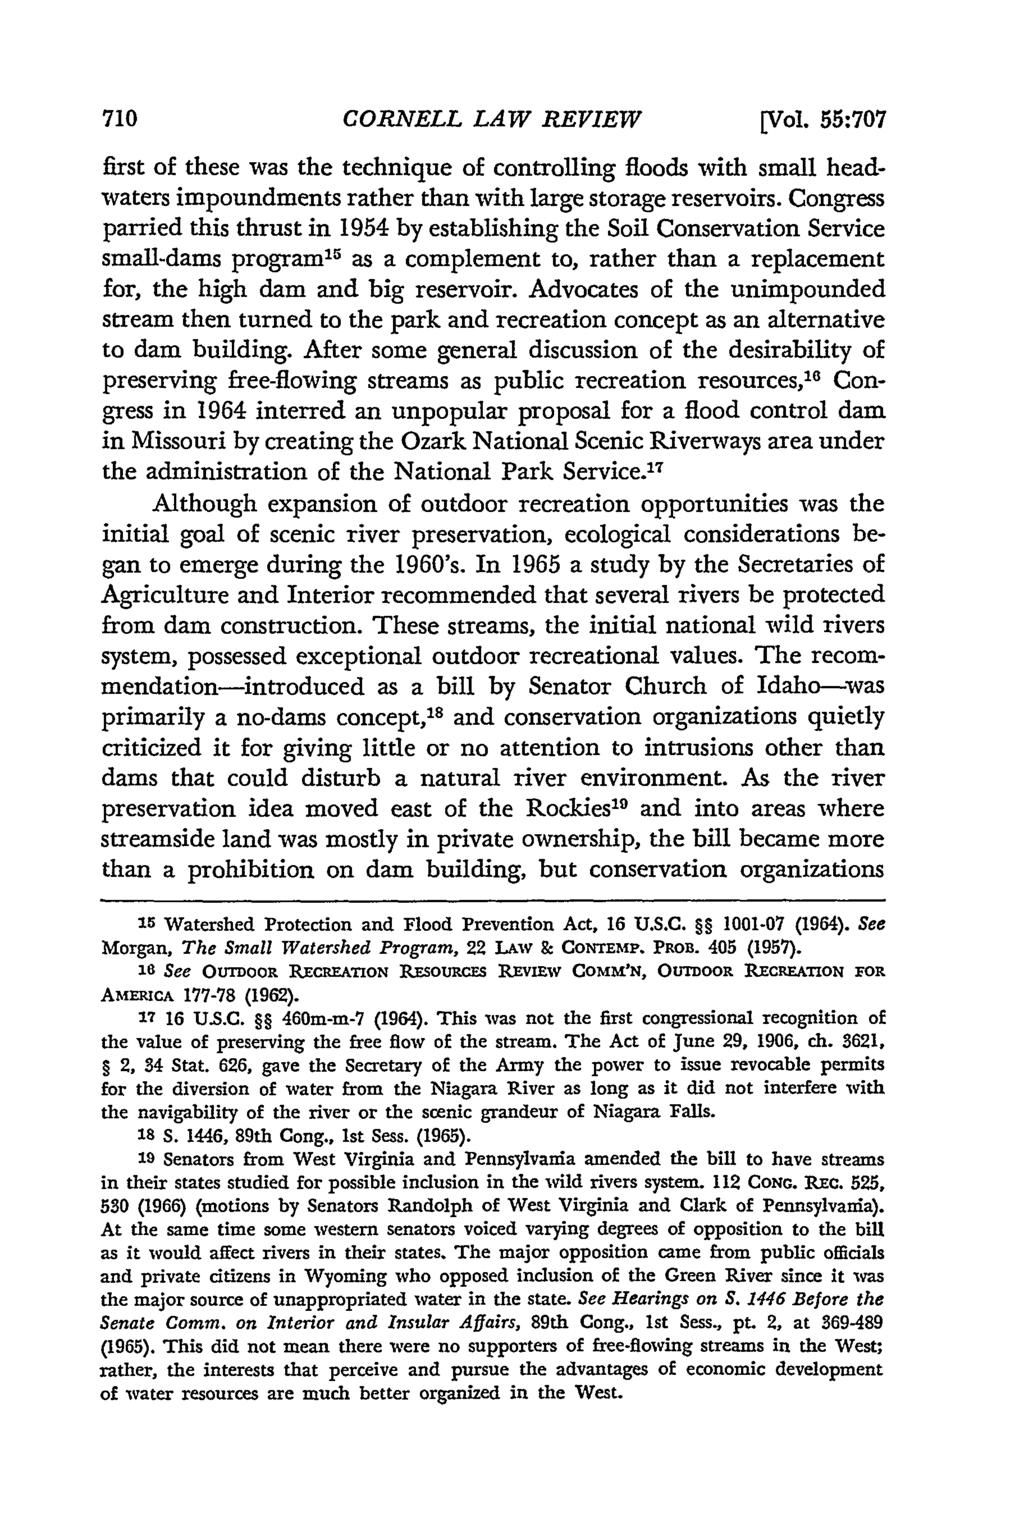 CORNELL LAW REVIEW [Vol. 55:707 first of these was the technique of controlling floods with small headwaters impoundments rather than with large storage reservoirs.